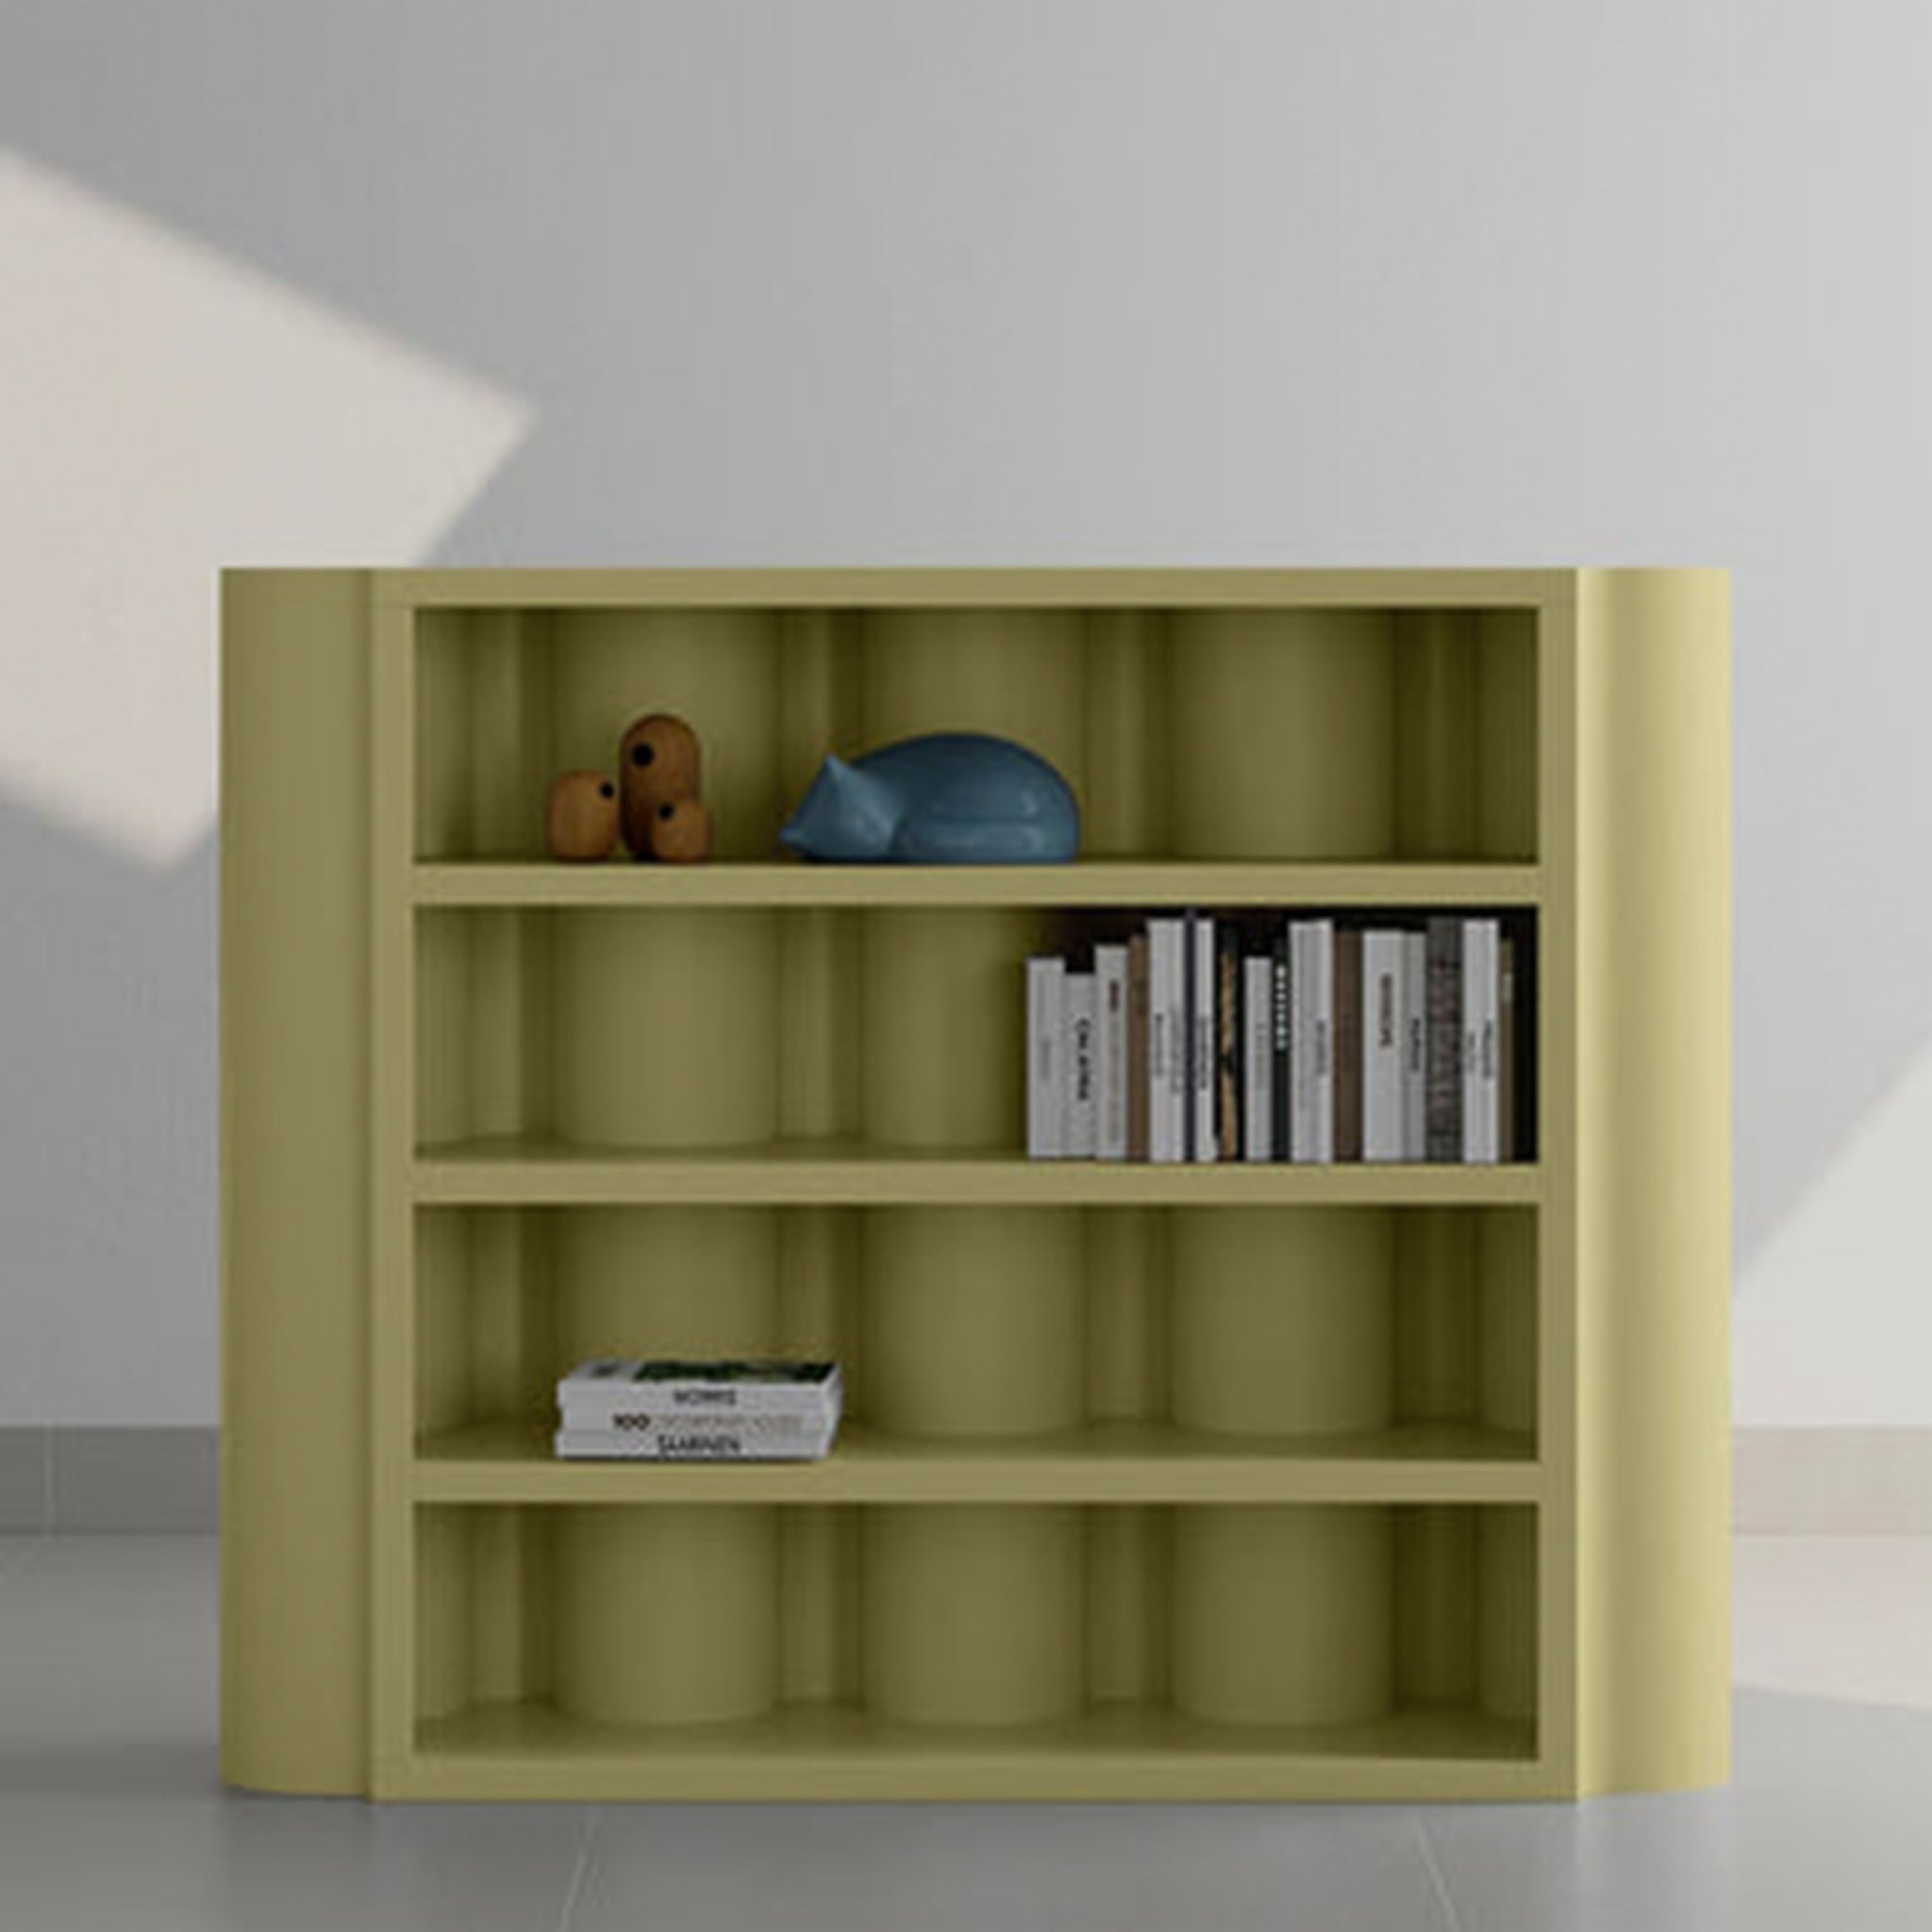 A modern yellow bookcase with curved edges, featuring several books and decorative items on its shelves.